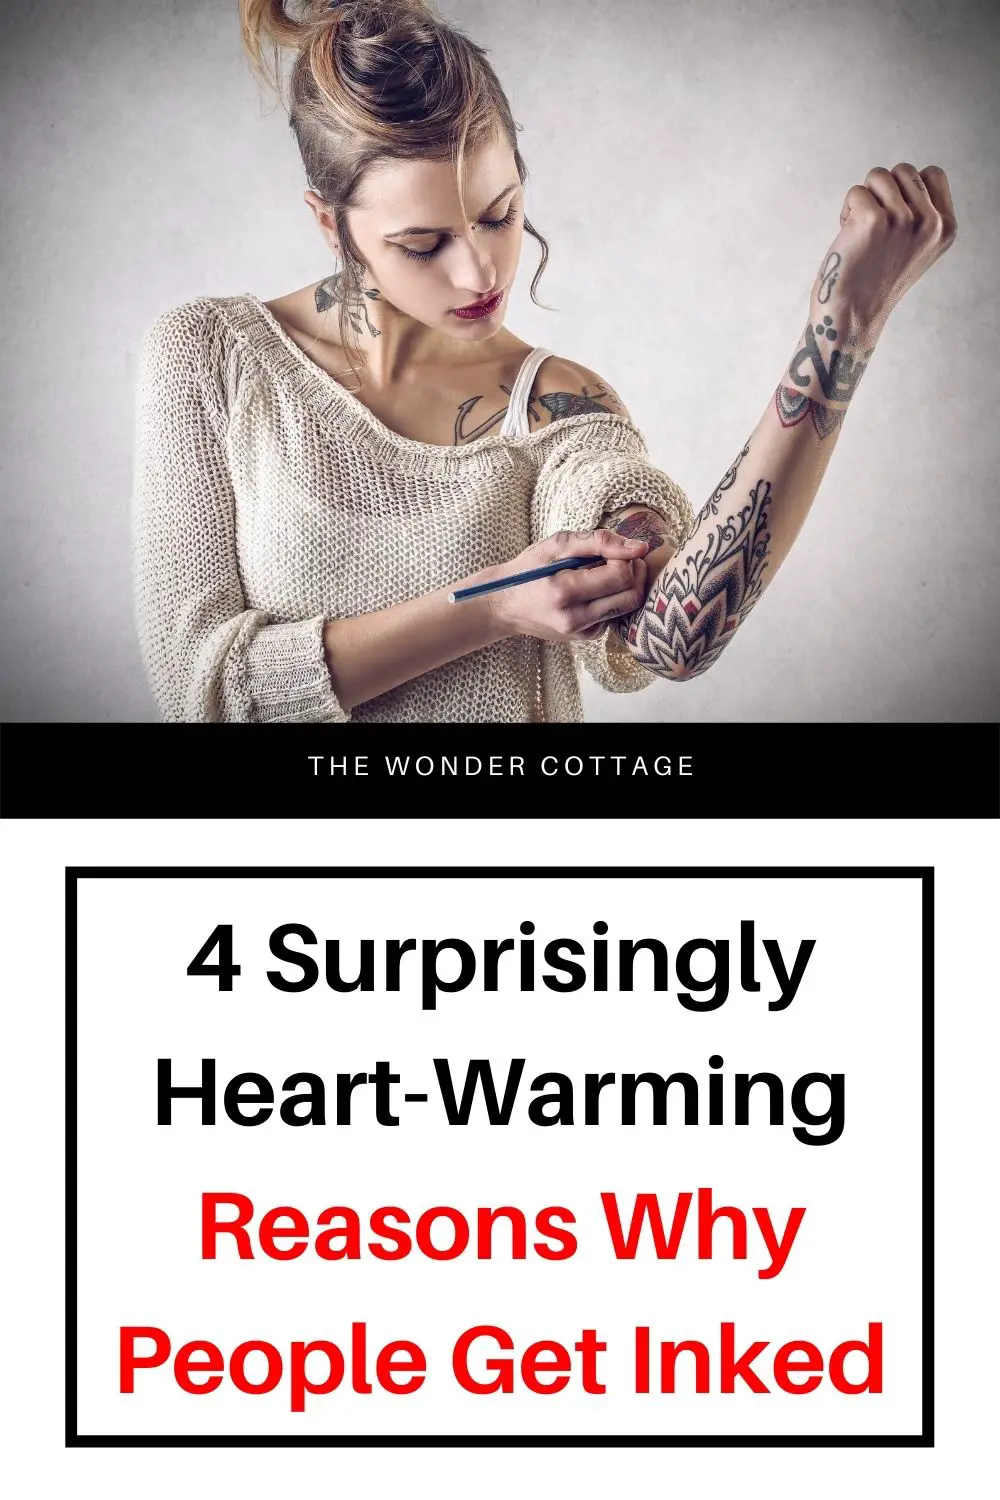 4 Surprisingly Heart-Warming Reasons Why People Get Inked